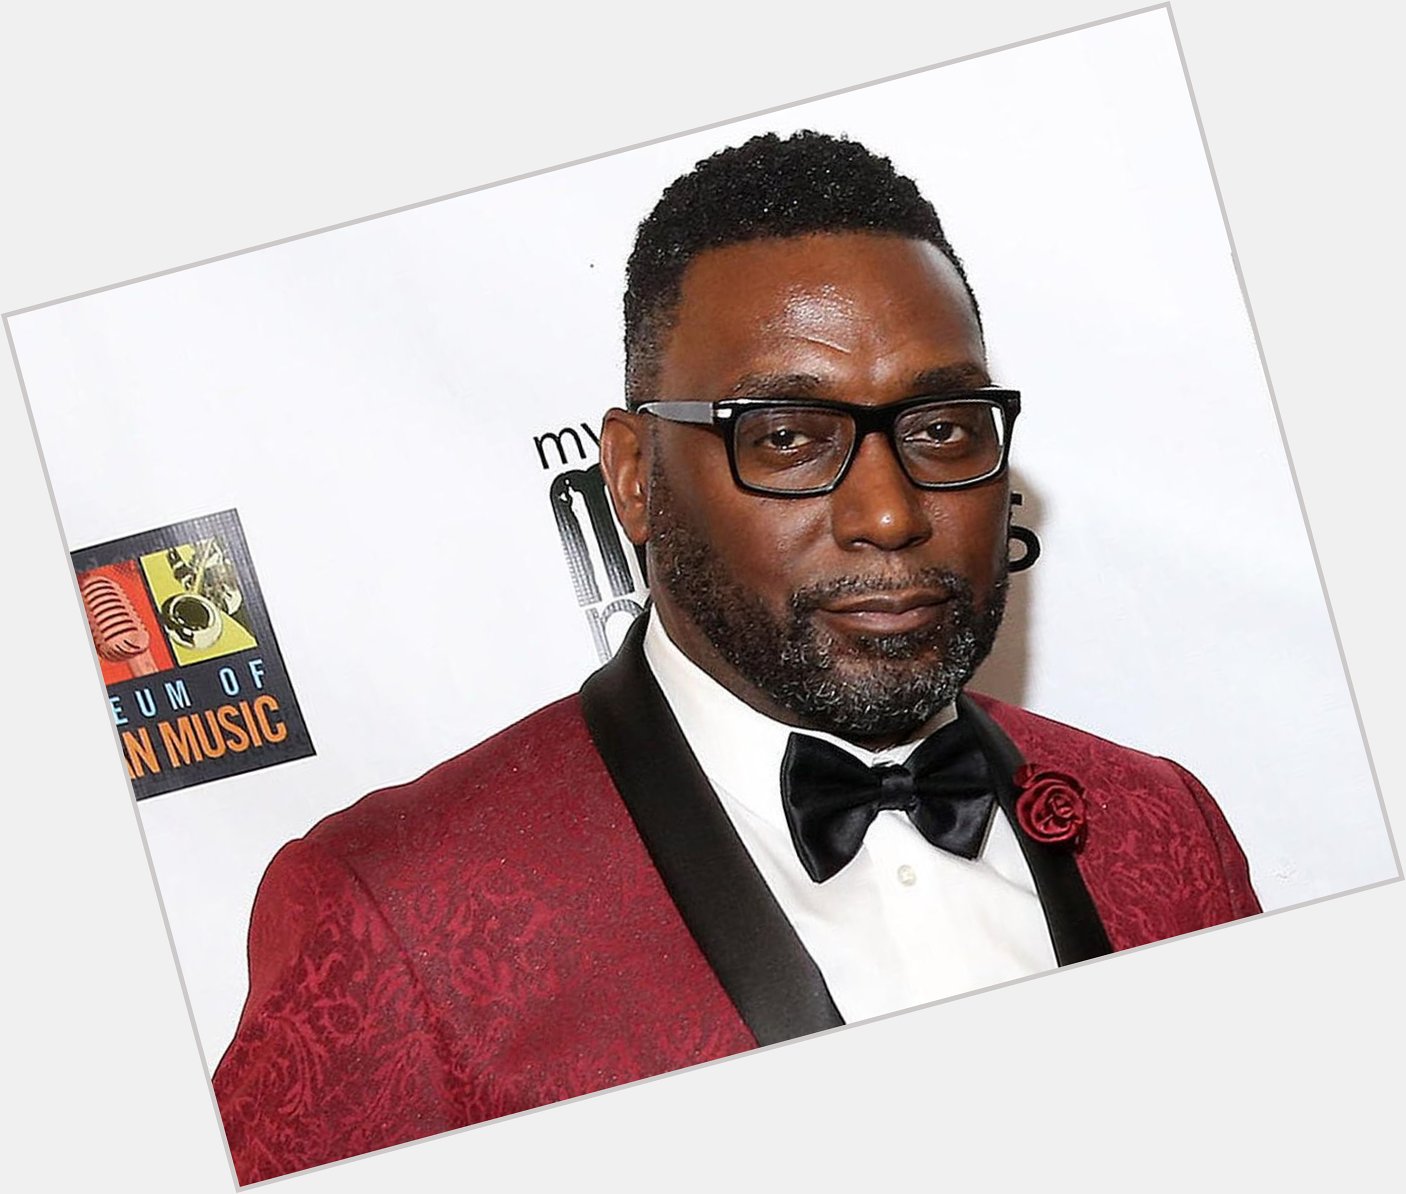 Happy Belated Birthday to the one and only Big Daddy Kane! 